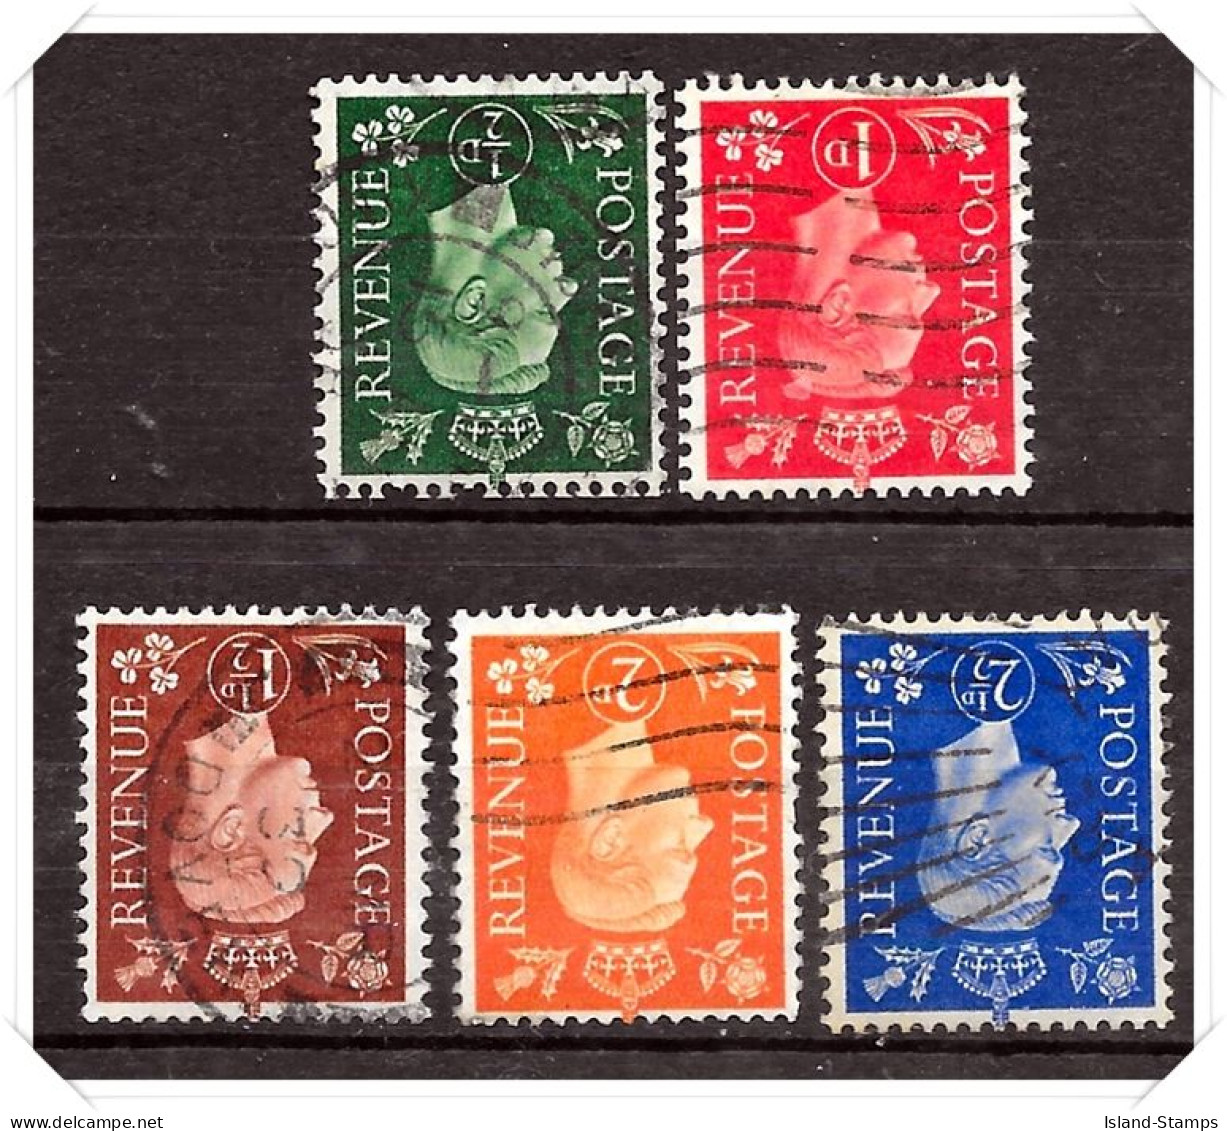 KGVI 1937 Definitives Inverted Watermark Set Of 5 SG462wi - SG466wi Fine Used Hrd2a - Nuevos